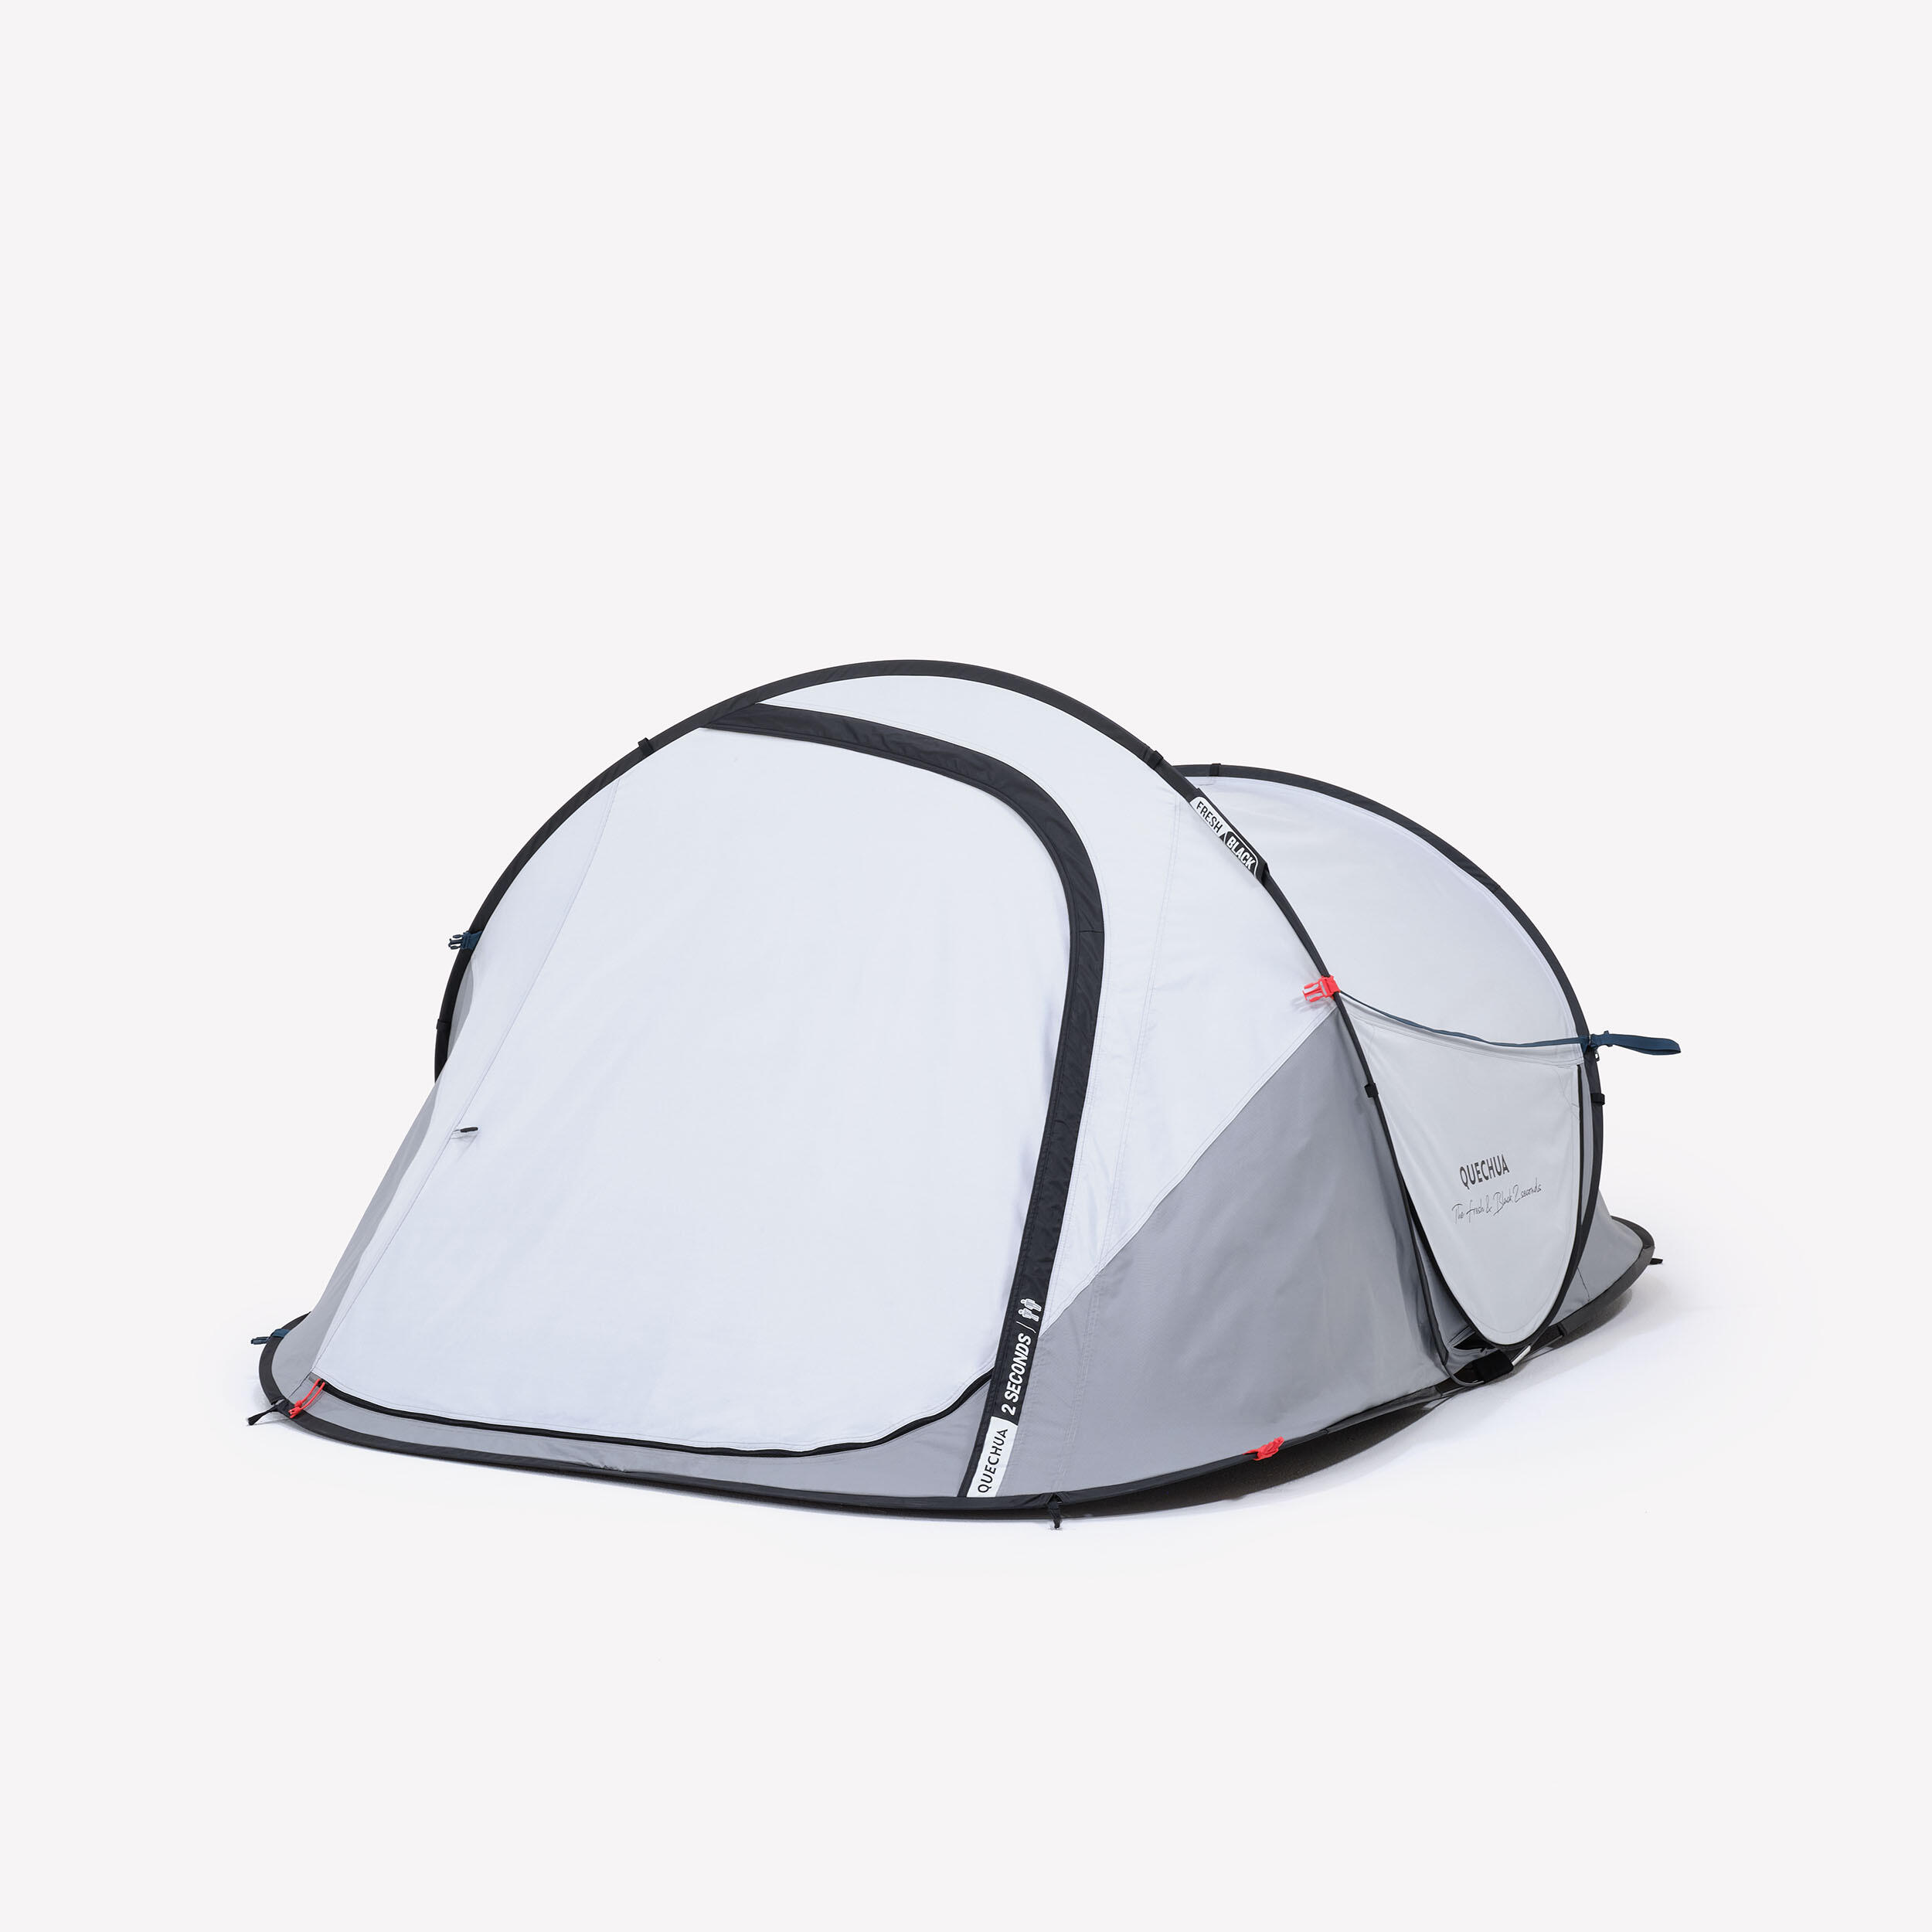 Camping tent 2 Seconds - 2-Person - Fresh&Black 13/15